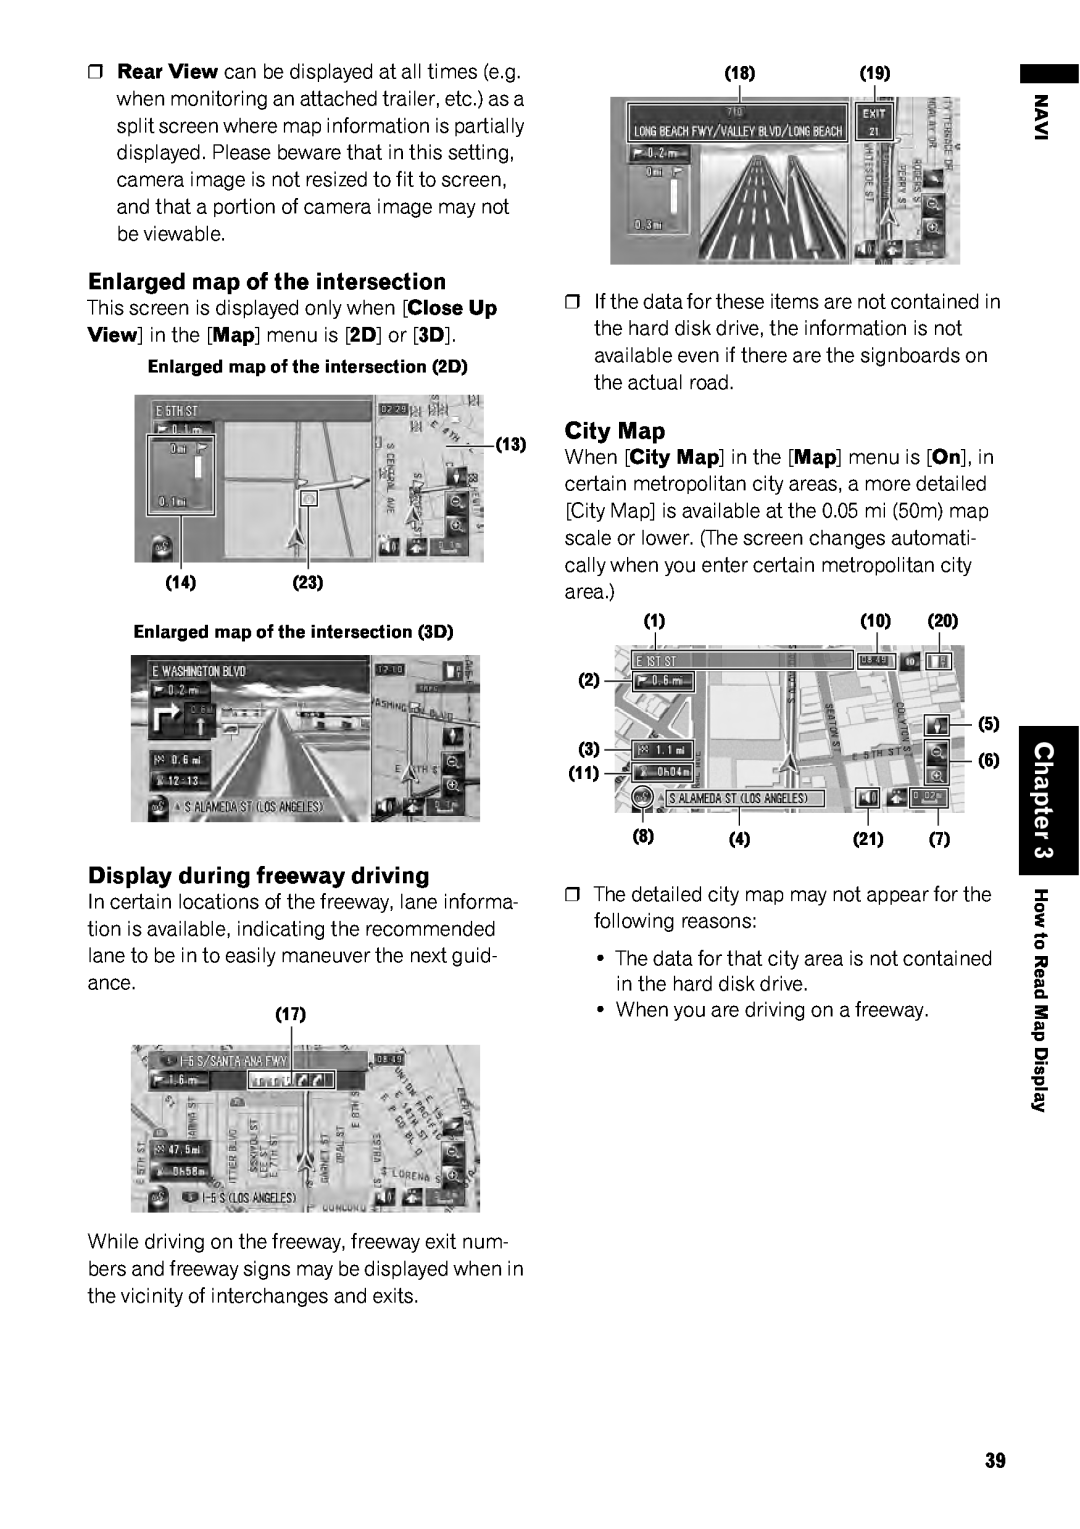 Pioneer AVIC-Z1 operation manual Enlarged map of the intersection, Display during freeway driving, City Map, Chapter 